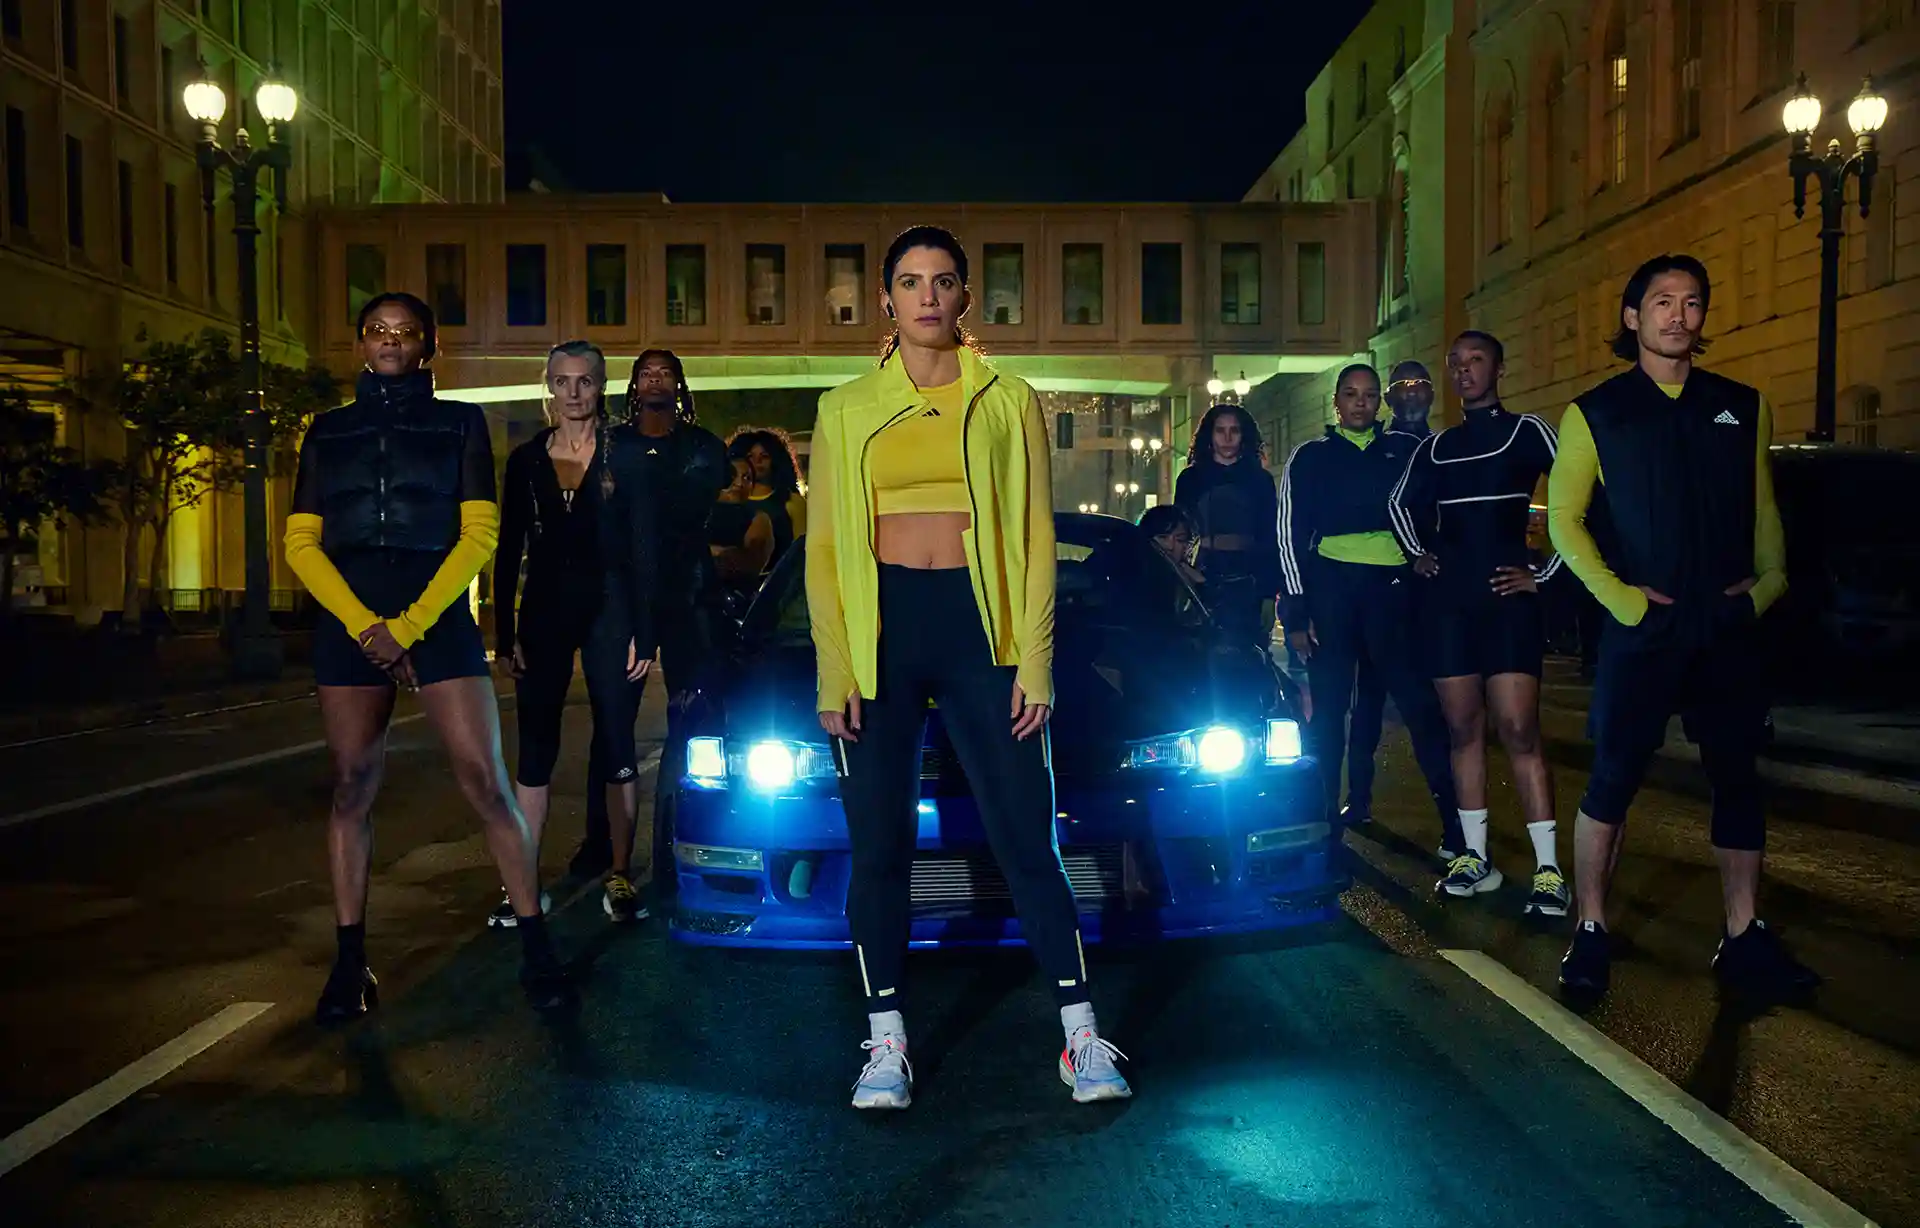 NEW ADIDAS STUDY FINDS 92% OF WOMEN ARE CONCERNED FOR THEIR SAFETY WHEN THEY GO FOR A RUN © Copyright PLPG GLOBAL MEDIA 2023